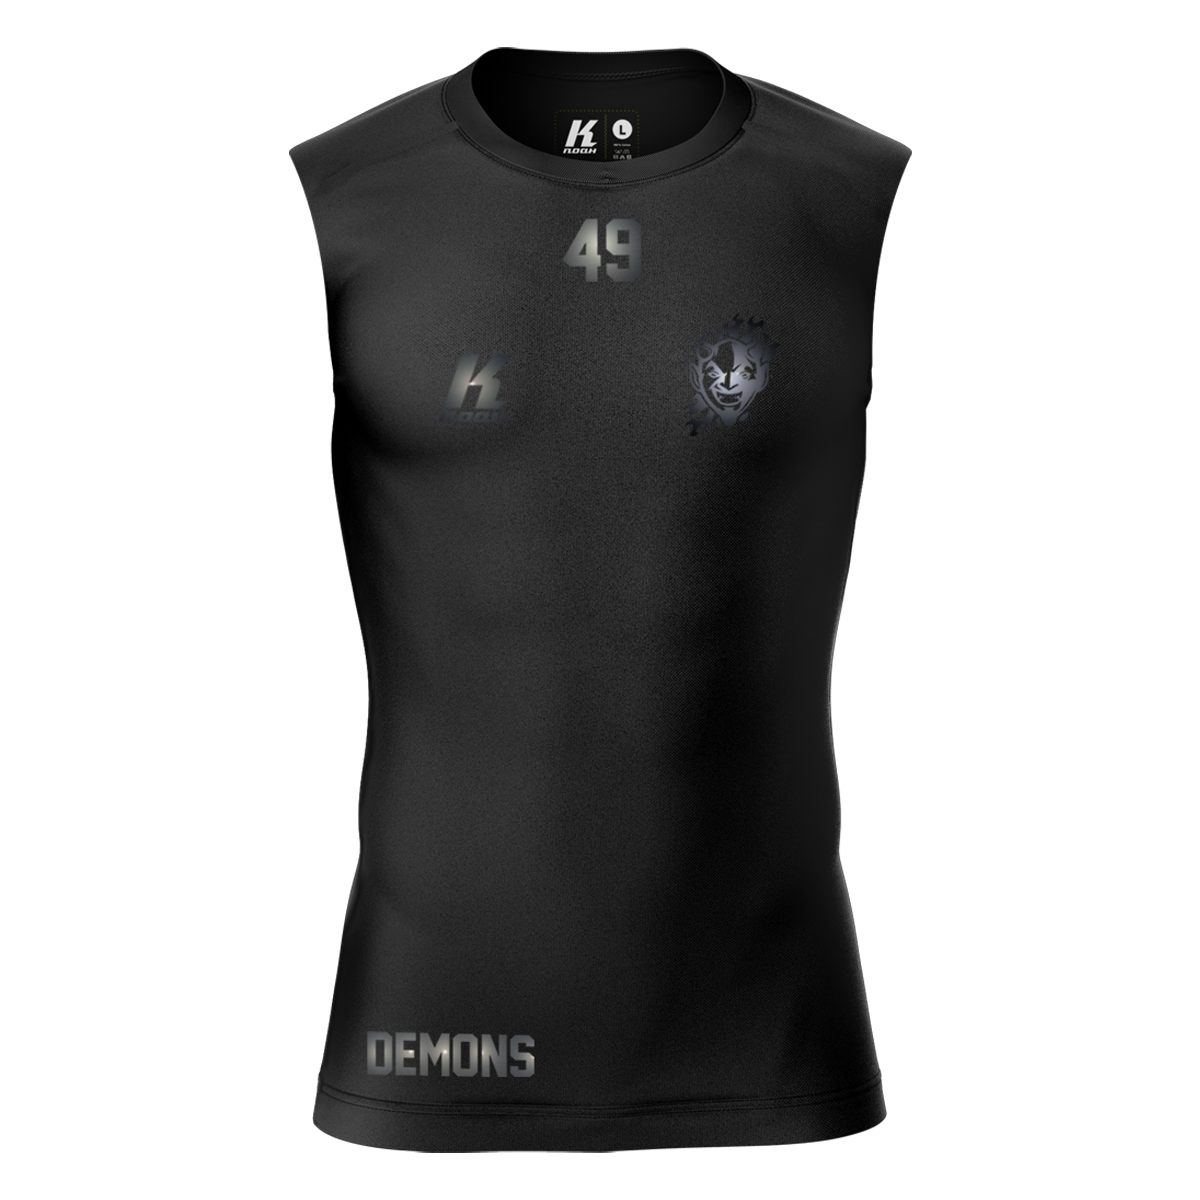 Demons "Blackline" K.Tech Compression Sleeveless Shirt with Playernumber/Initials